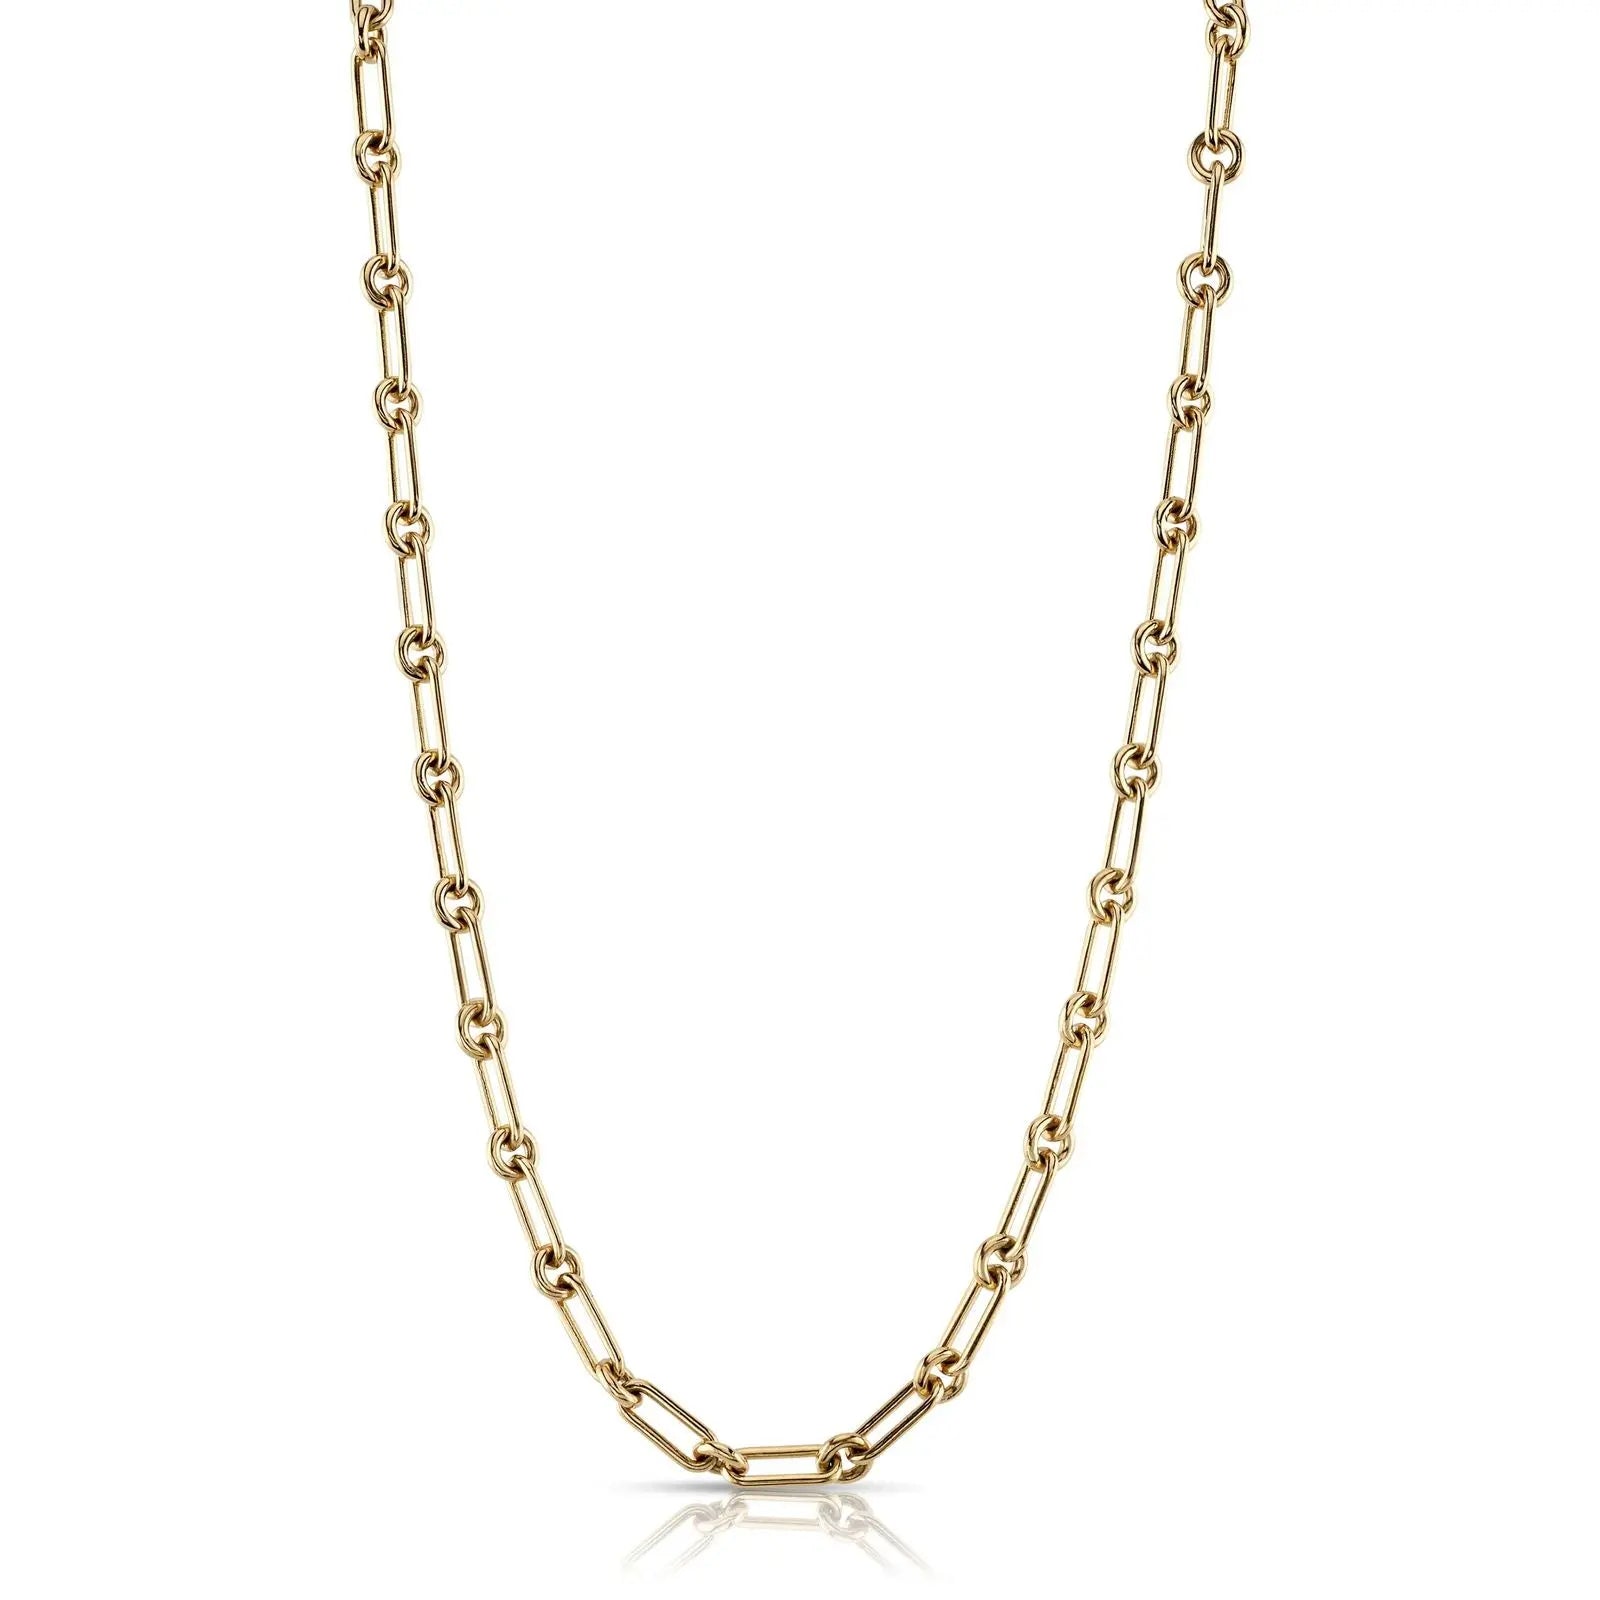 Handcrafted 18K gold long and round link necklace.  Necklace measures 17".   Designed by Single Stone and handmade in LA.